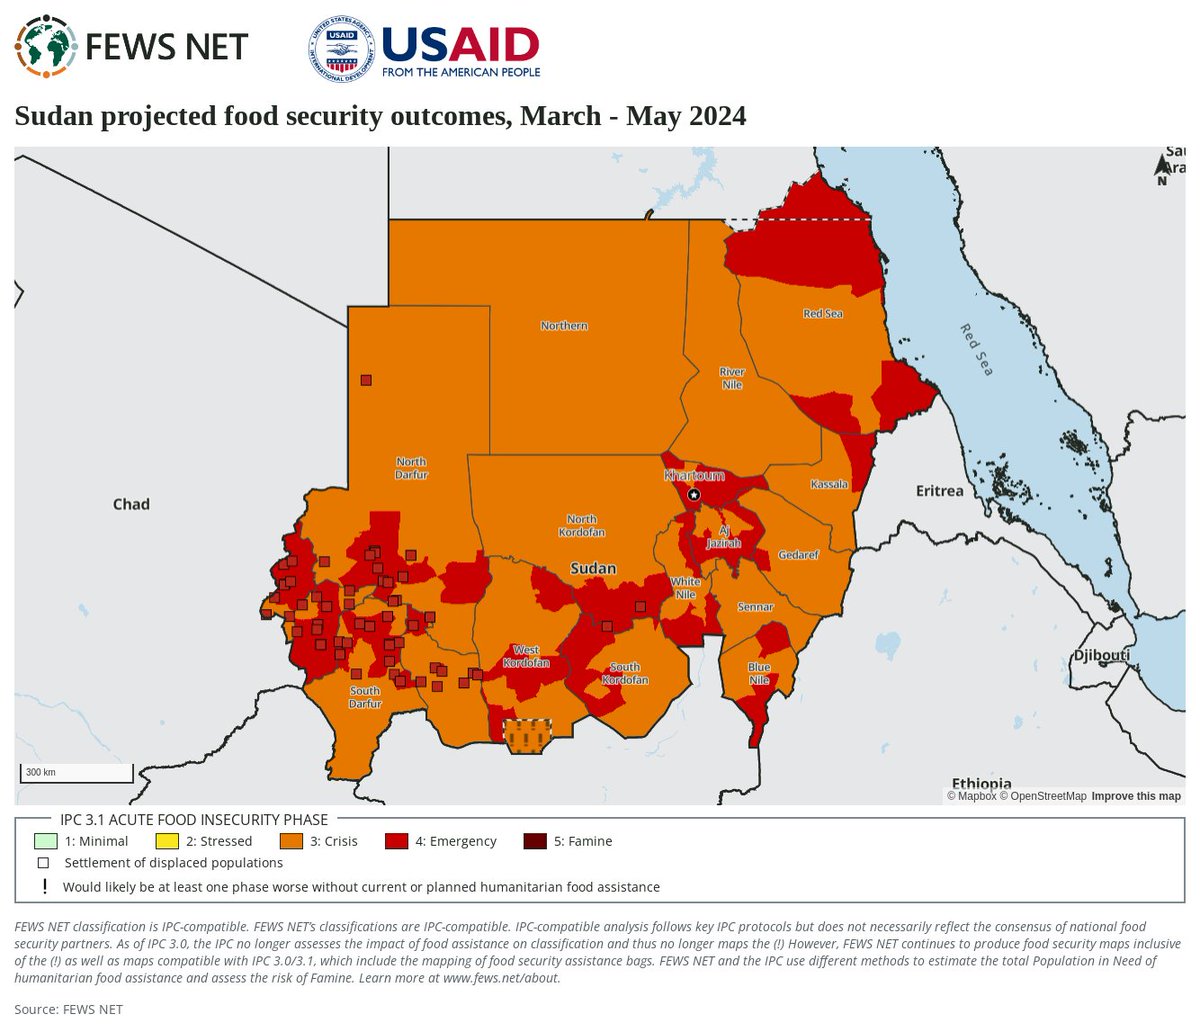 Conflict and food availability gap drive high needs in #Sudan amid earlier than usual lean season ow.ly/ZoiR50RgwUP